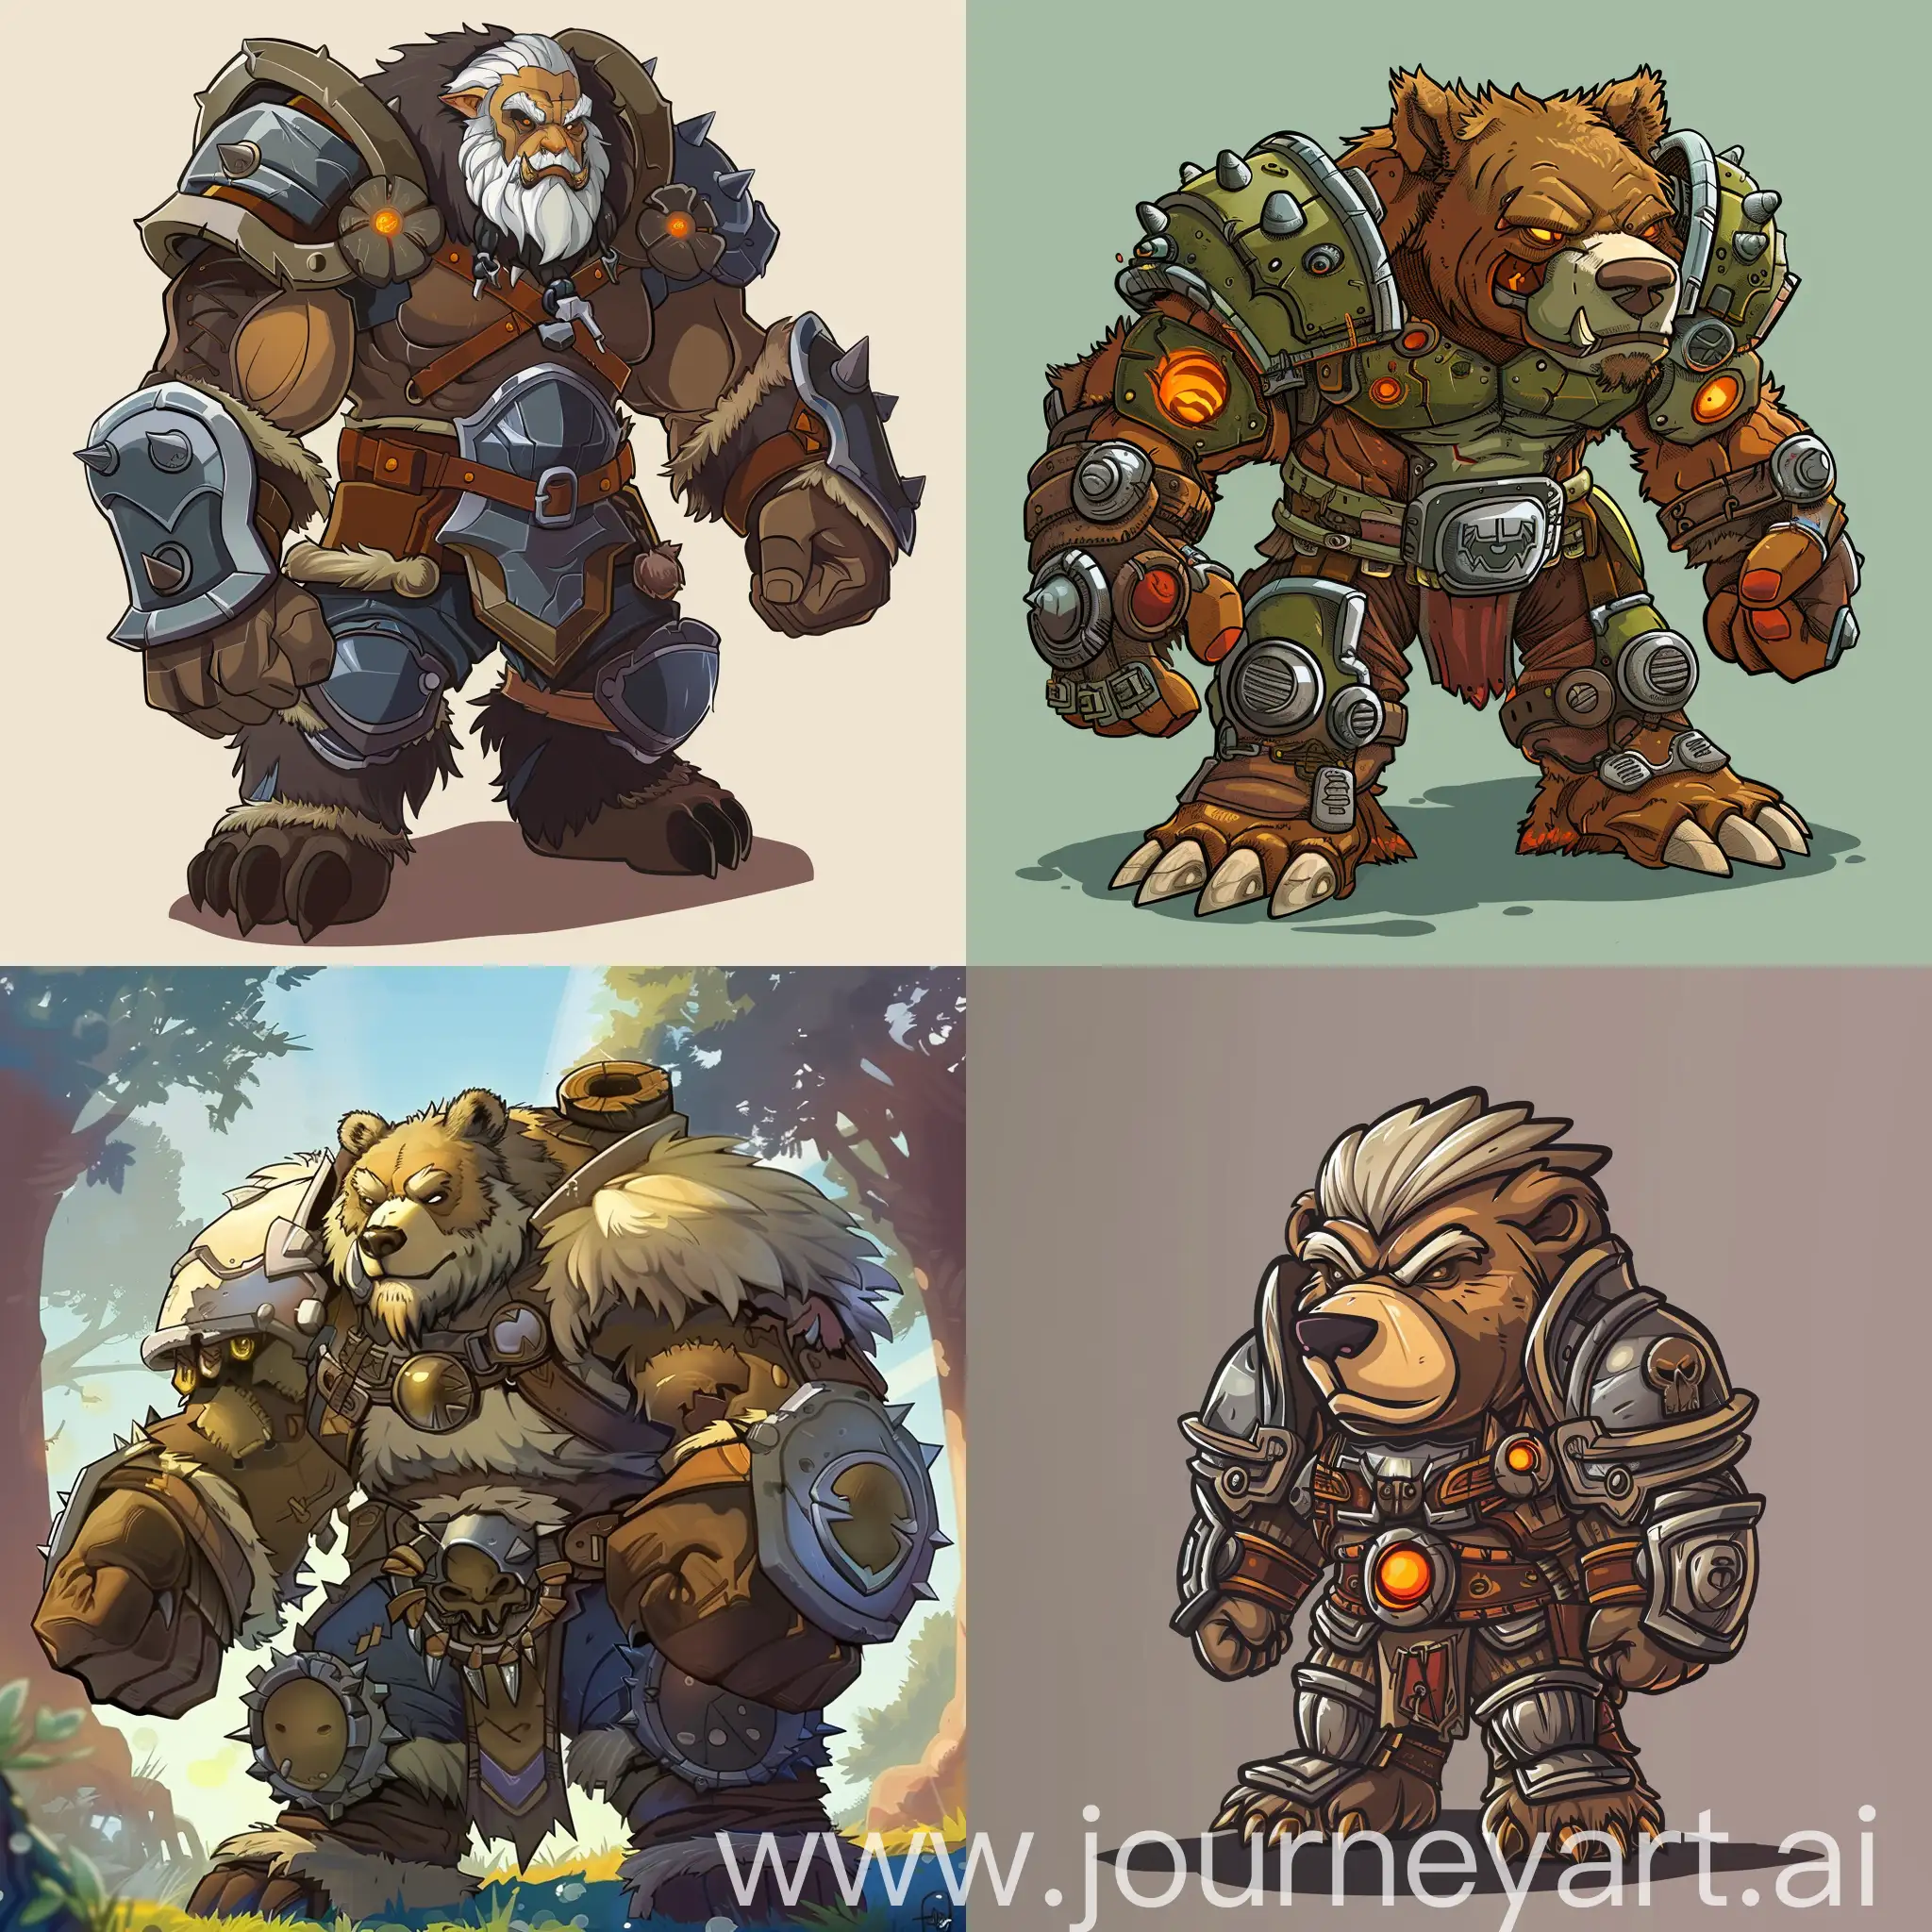 Tank druid from the game "World of Warcraft" in the form of a bear from the horde in a cartoon style for his avatar.